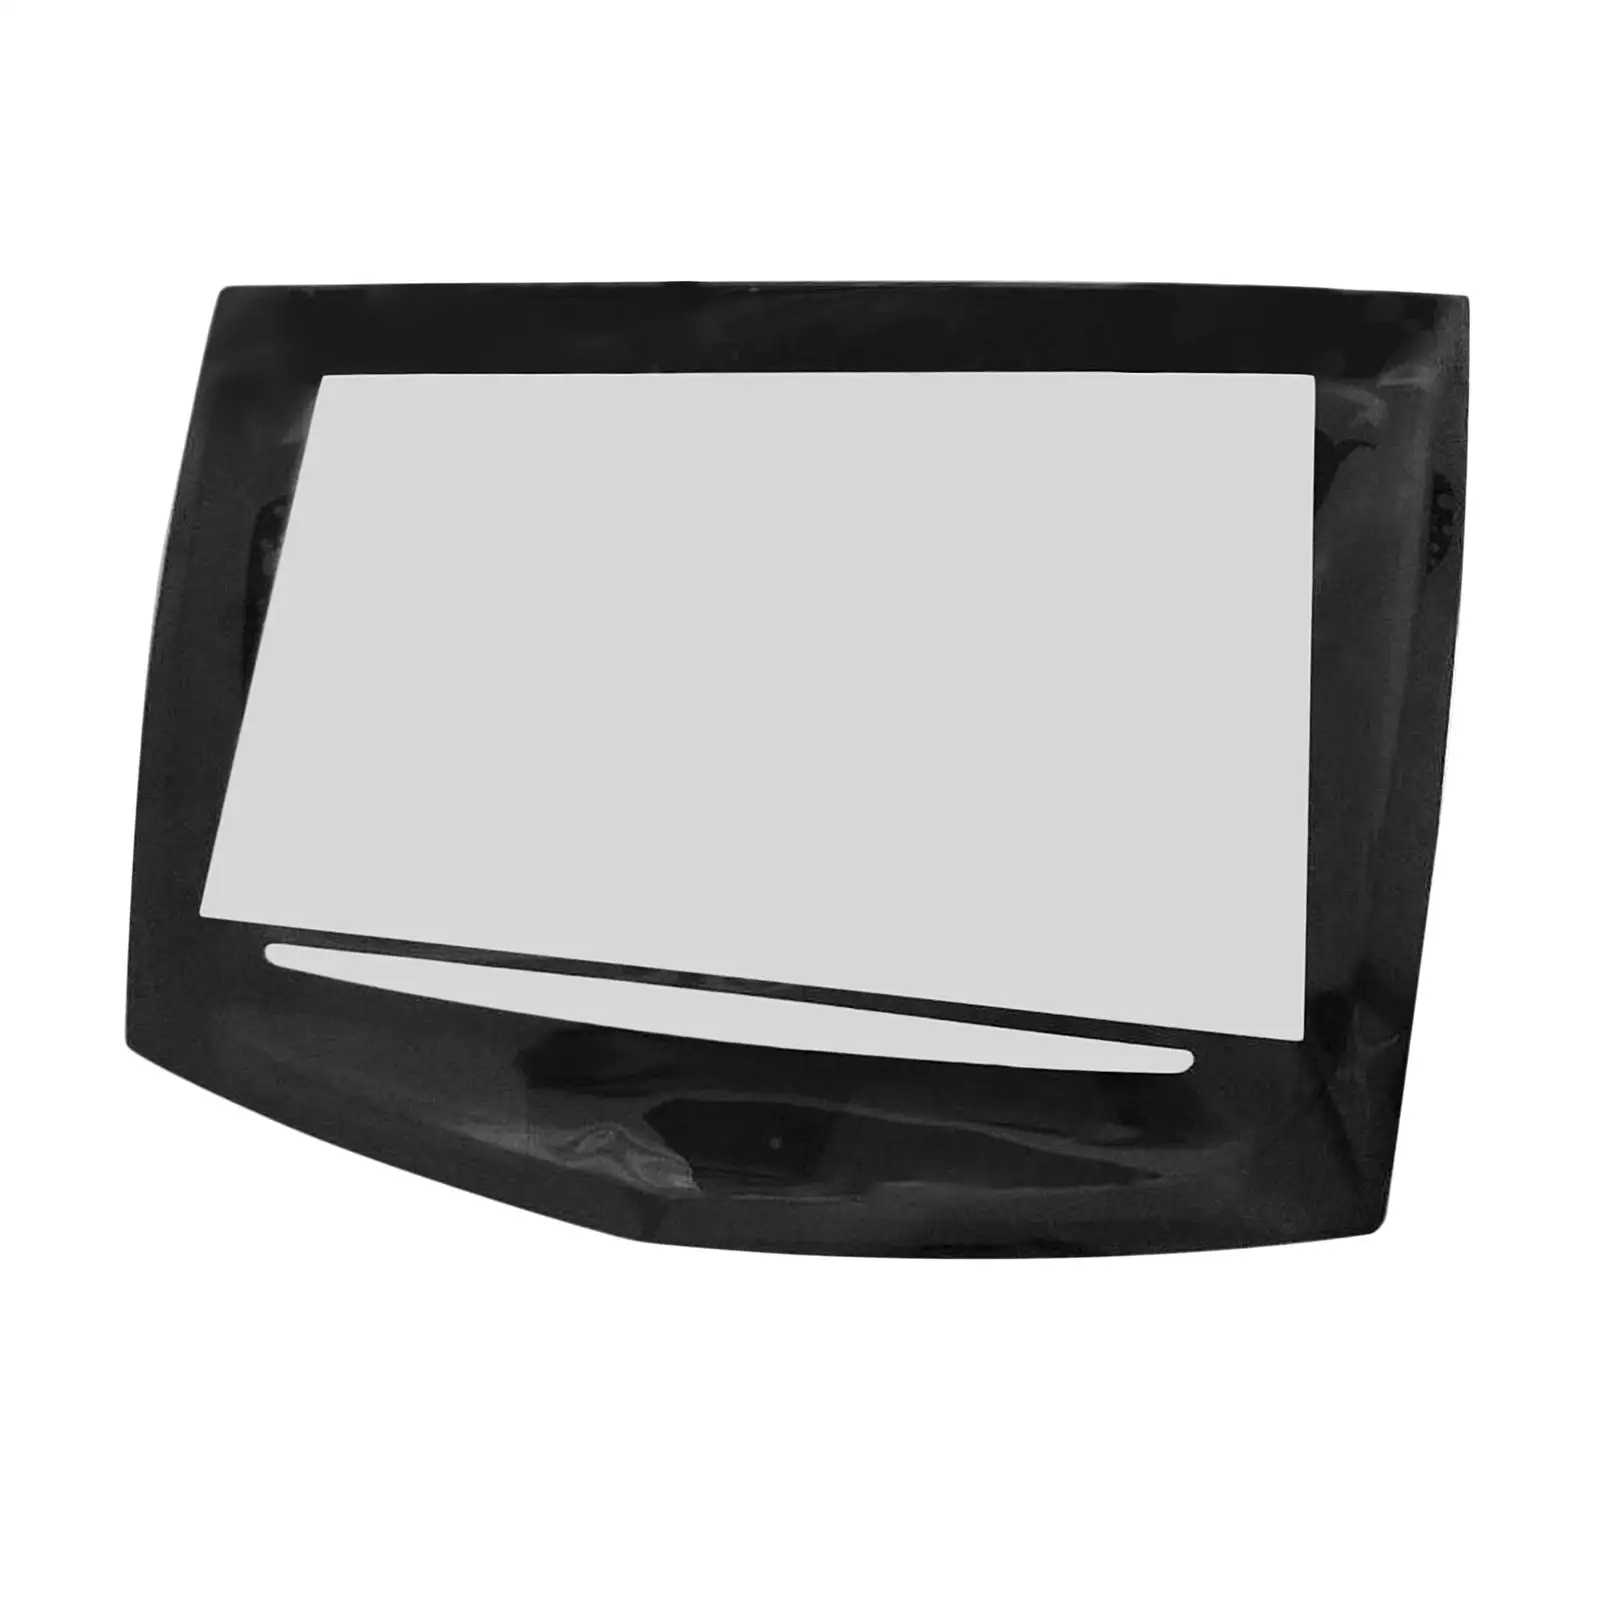 Glass Touch Screen Display Easy Installation, Assemblies Screen for 18-20 84232093 Vehicle Parts ,Car Supplies